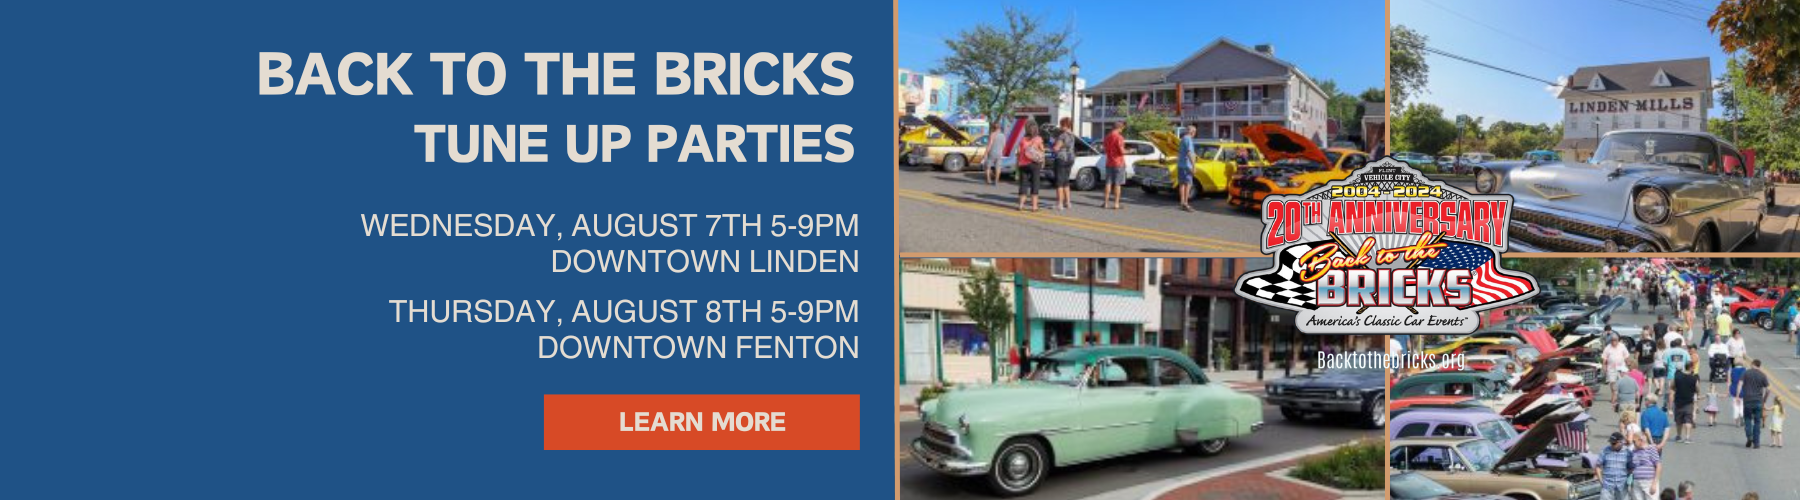 Back to the Bricks Tune Up Parties